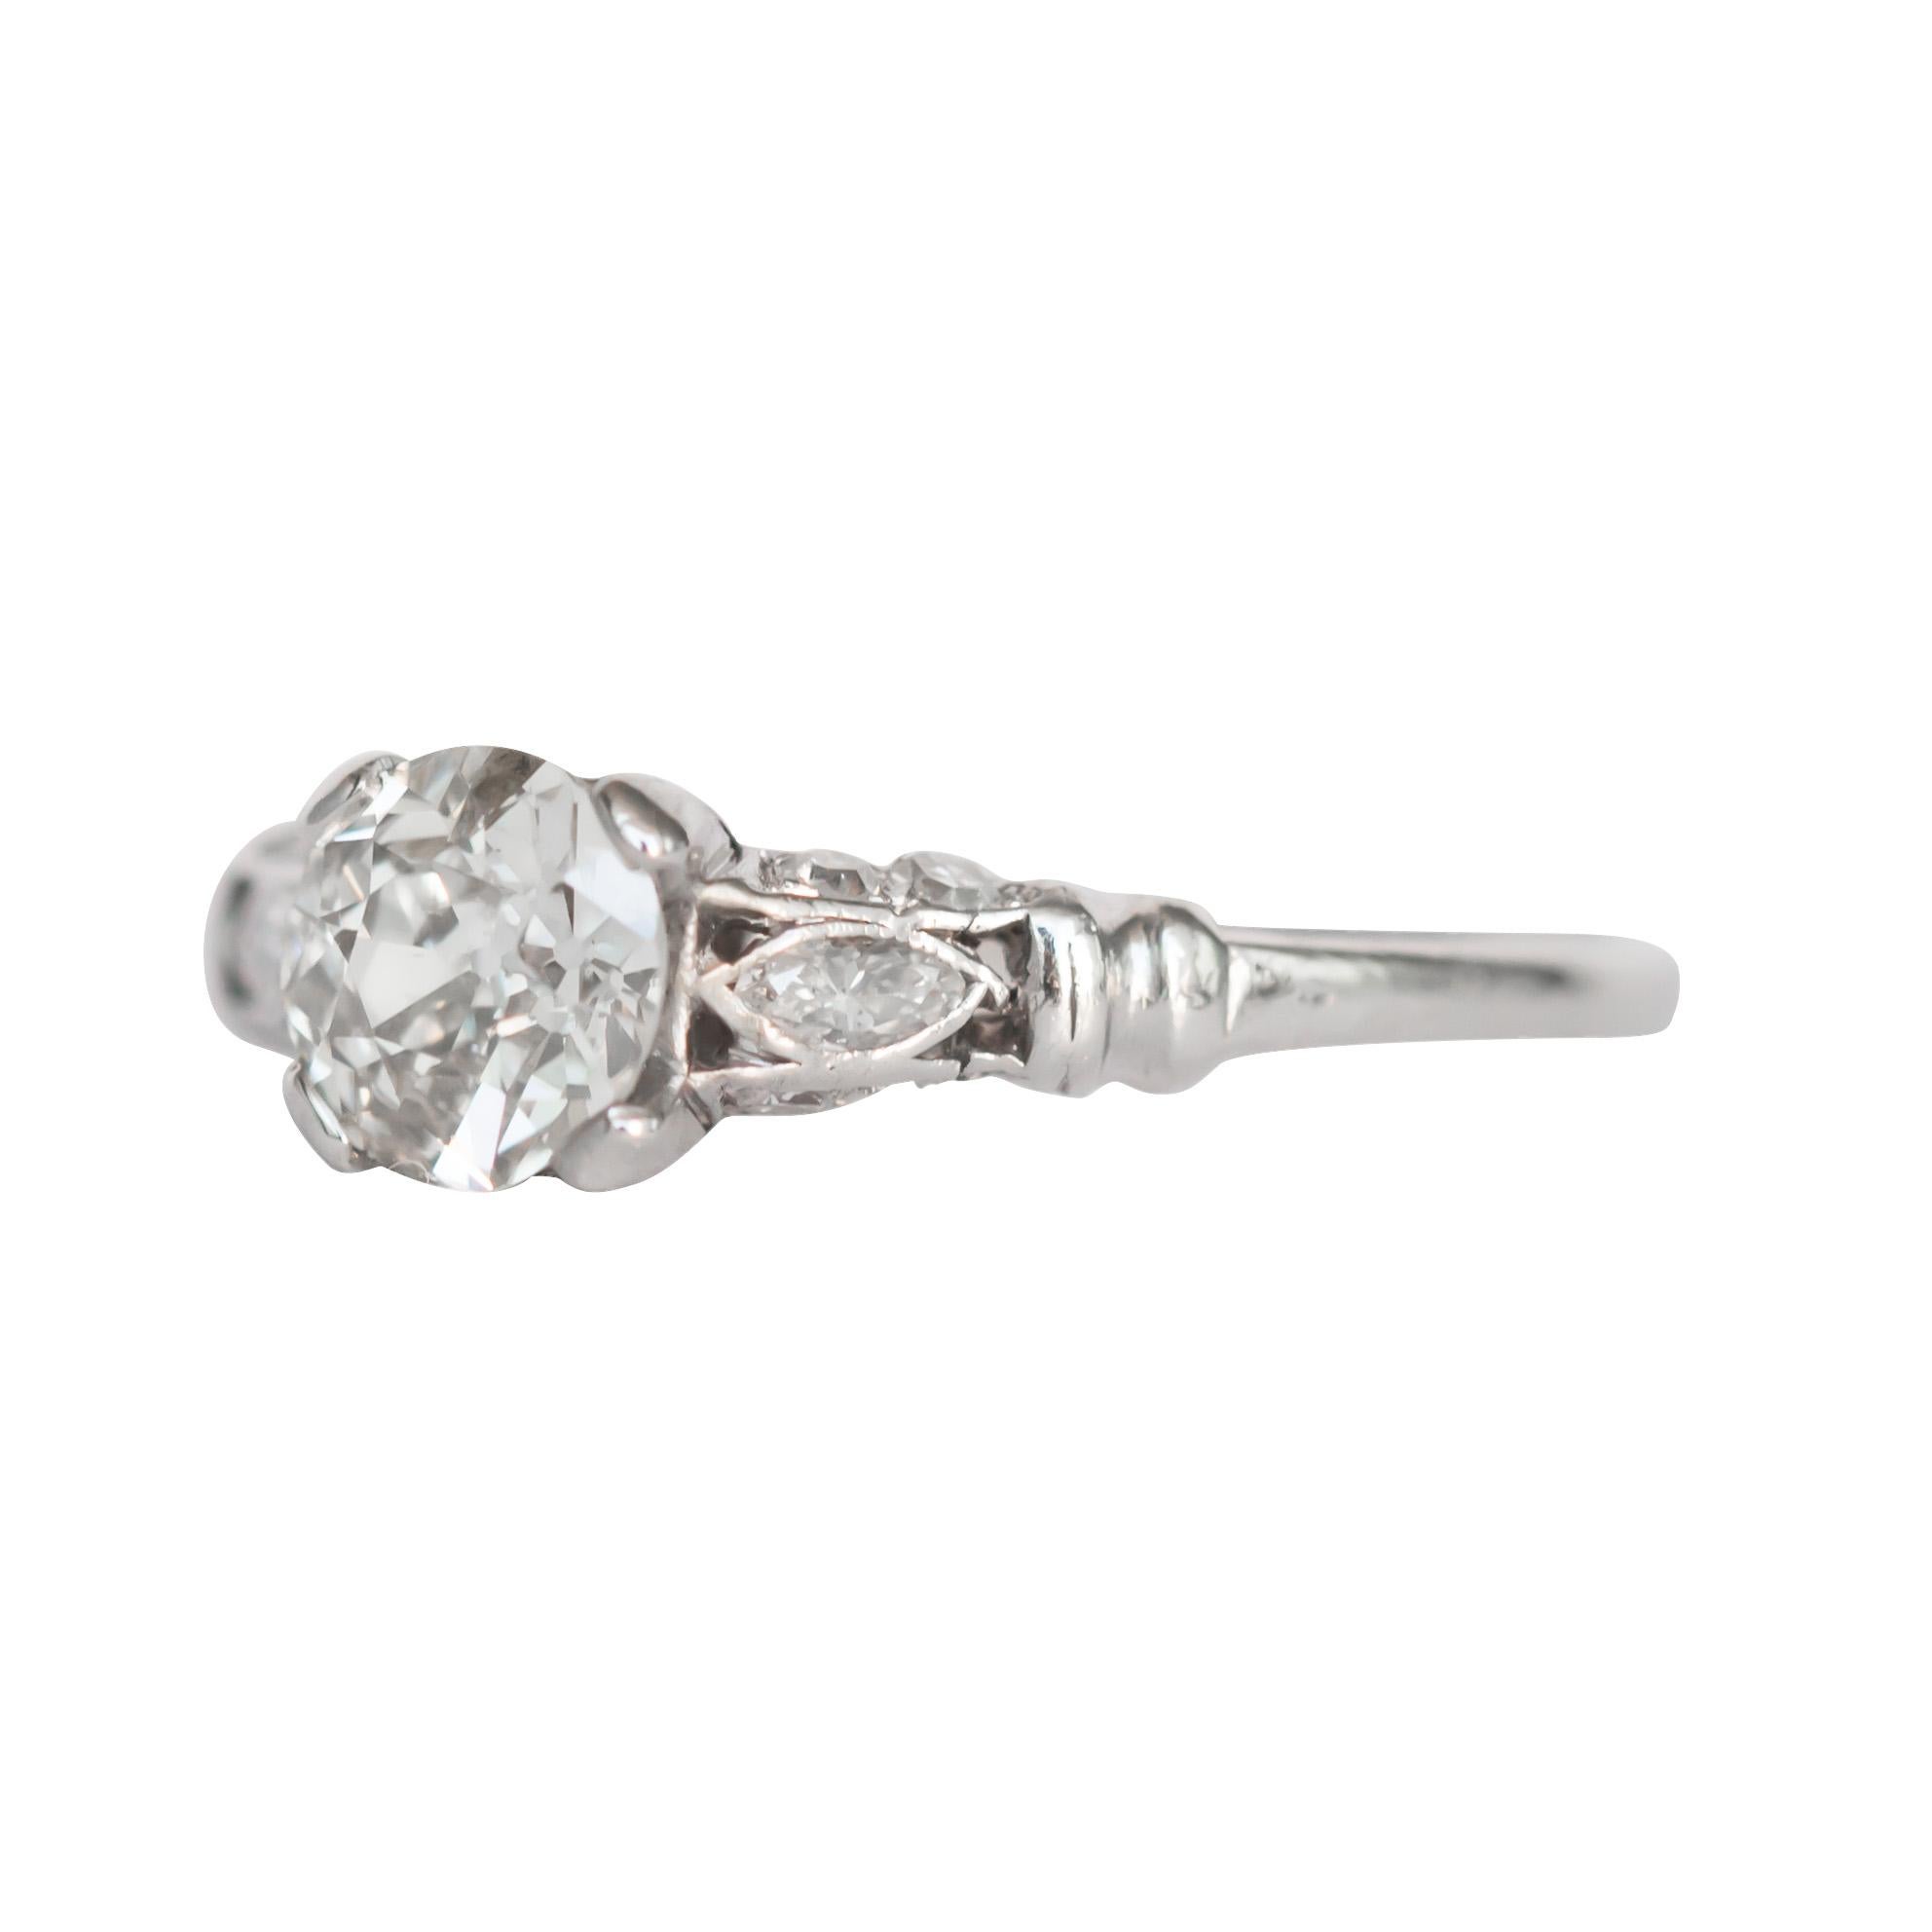 Item Details: 
Ring Size: 6.75
Metal Type: Platinum [Hallmarked, and Tested]
Weight: 2.5 grams

Center Diamond Details:
Weight: .61 carat
Cut: Old European Brilliant
Color: K
Clarity: VS2

Side Diamond Details:
Weight: .25 carat, total weight
Cut: